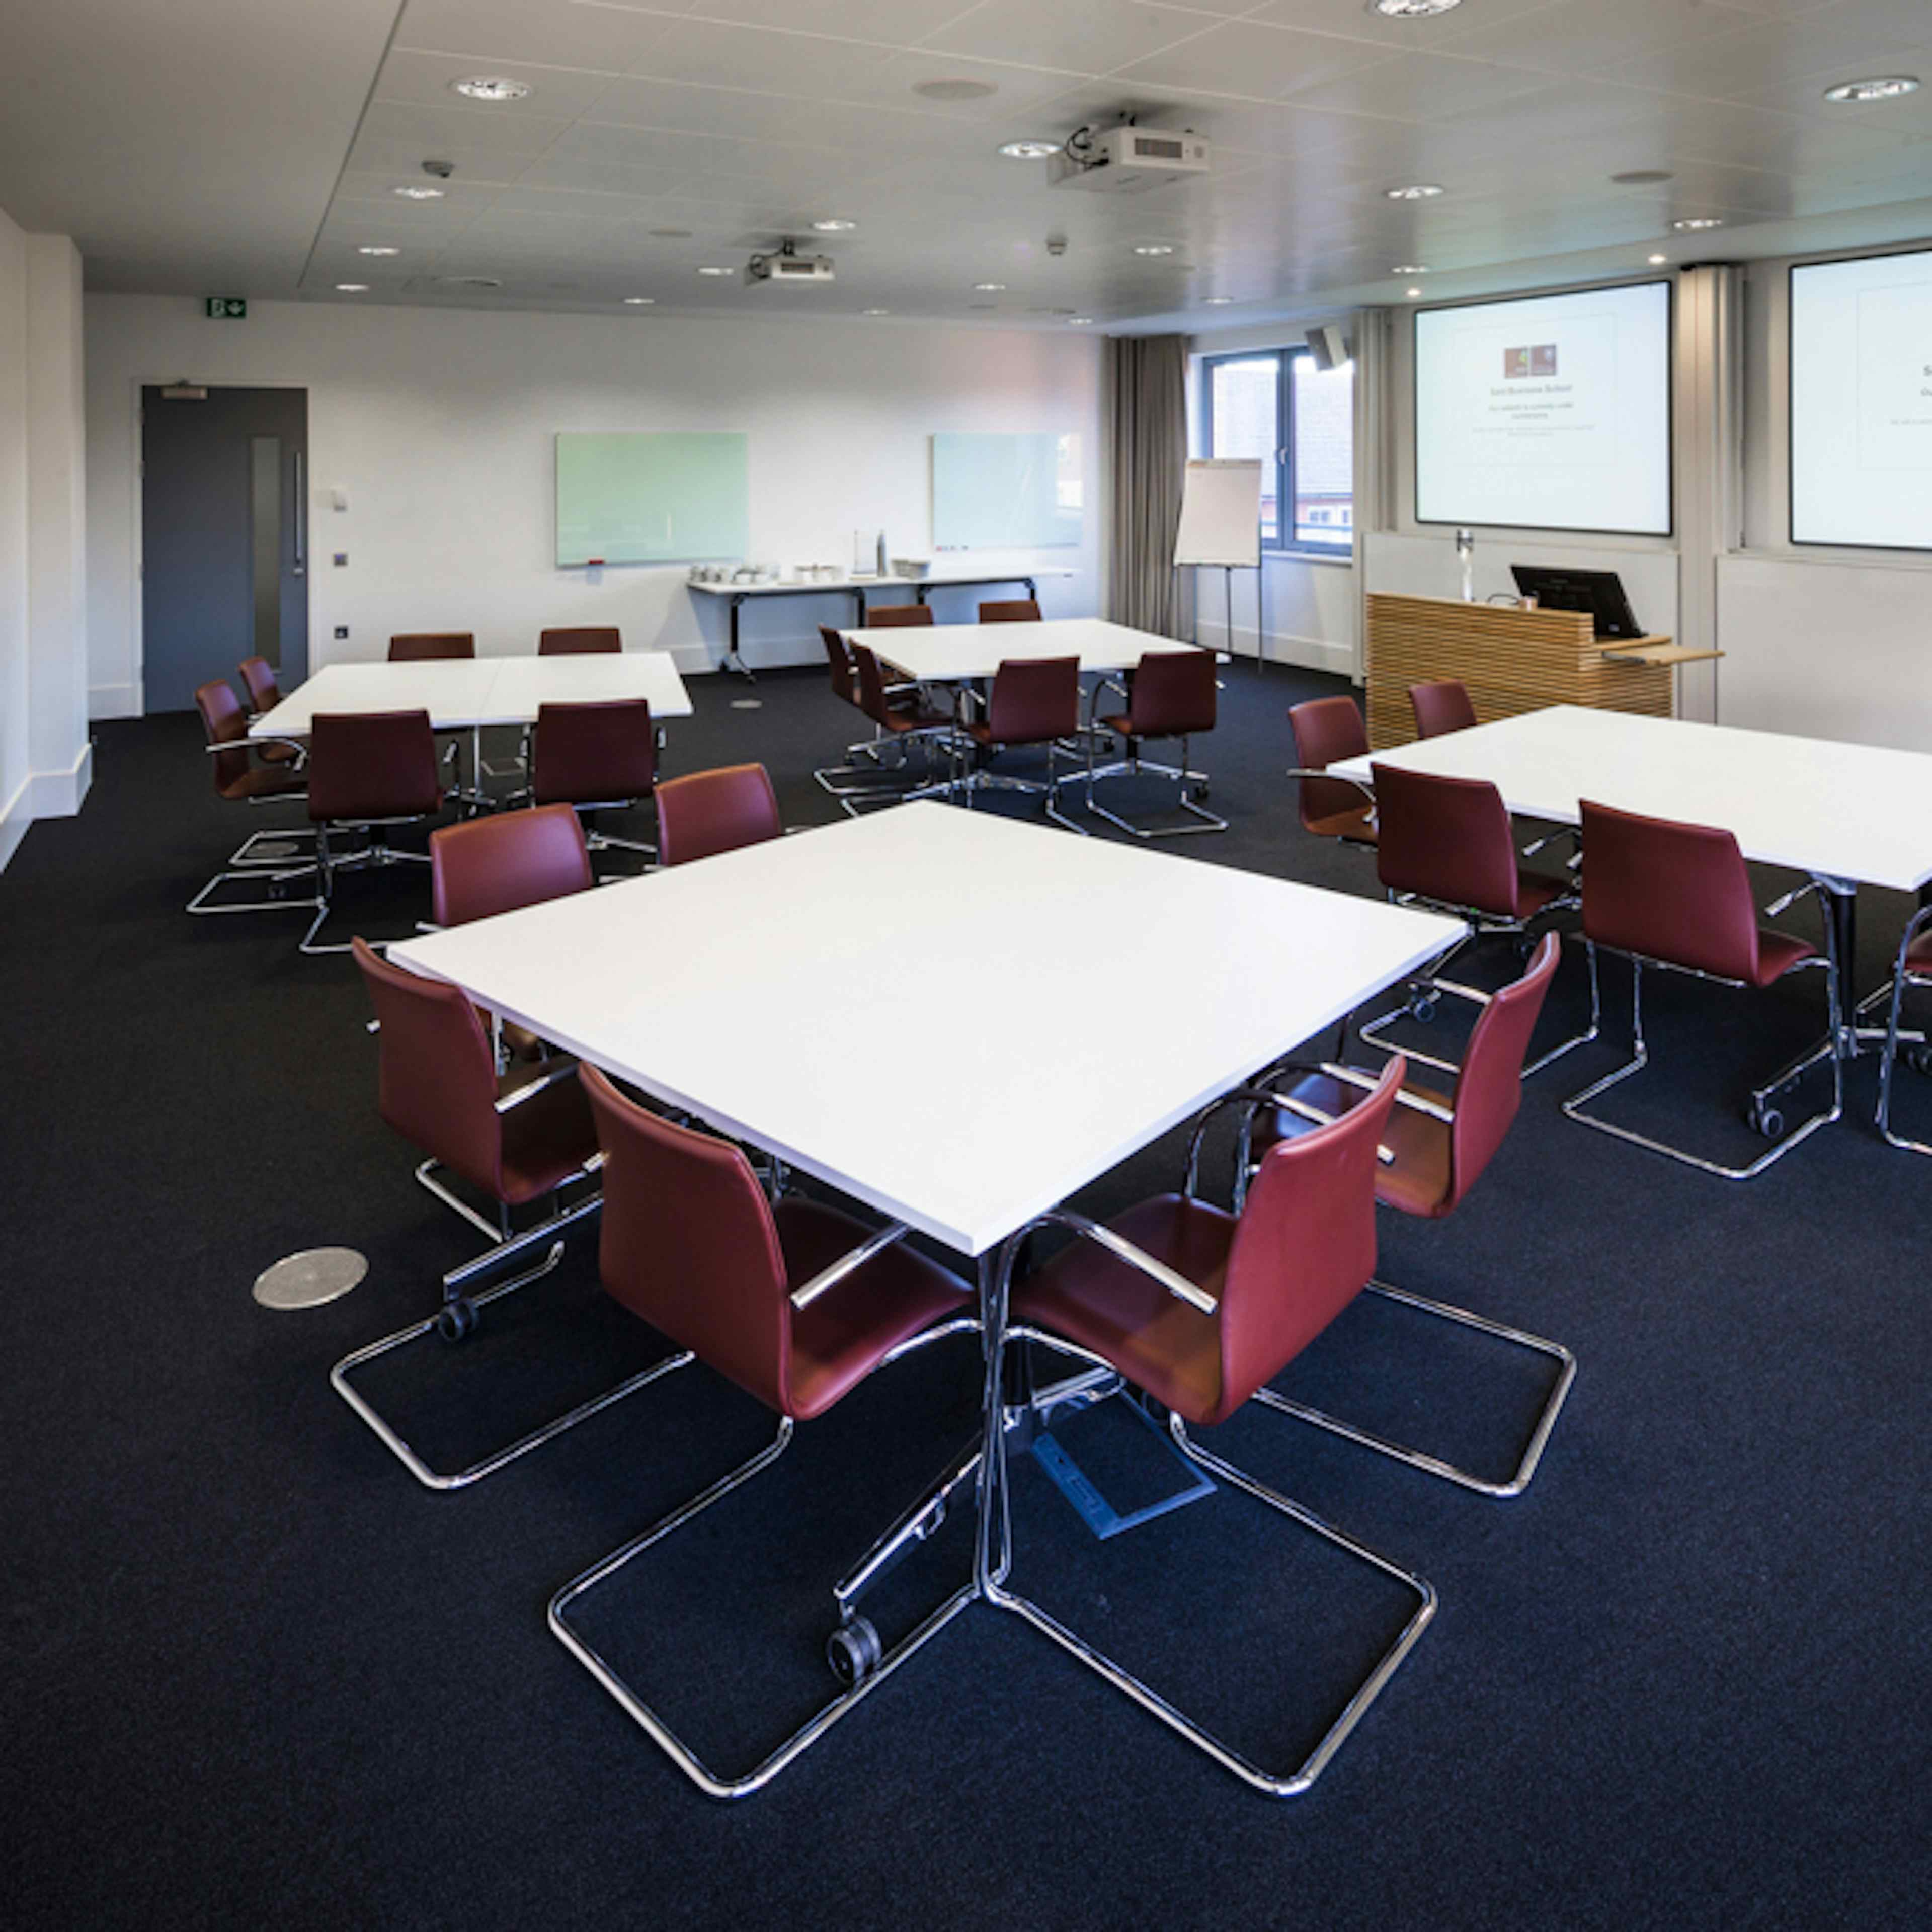 Park End Street Venue, Saïd Business School, University of Oxford - Classroom 1 and Clore Lecture Room image 3